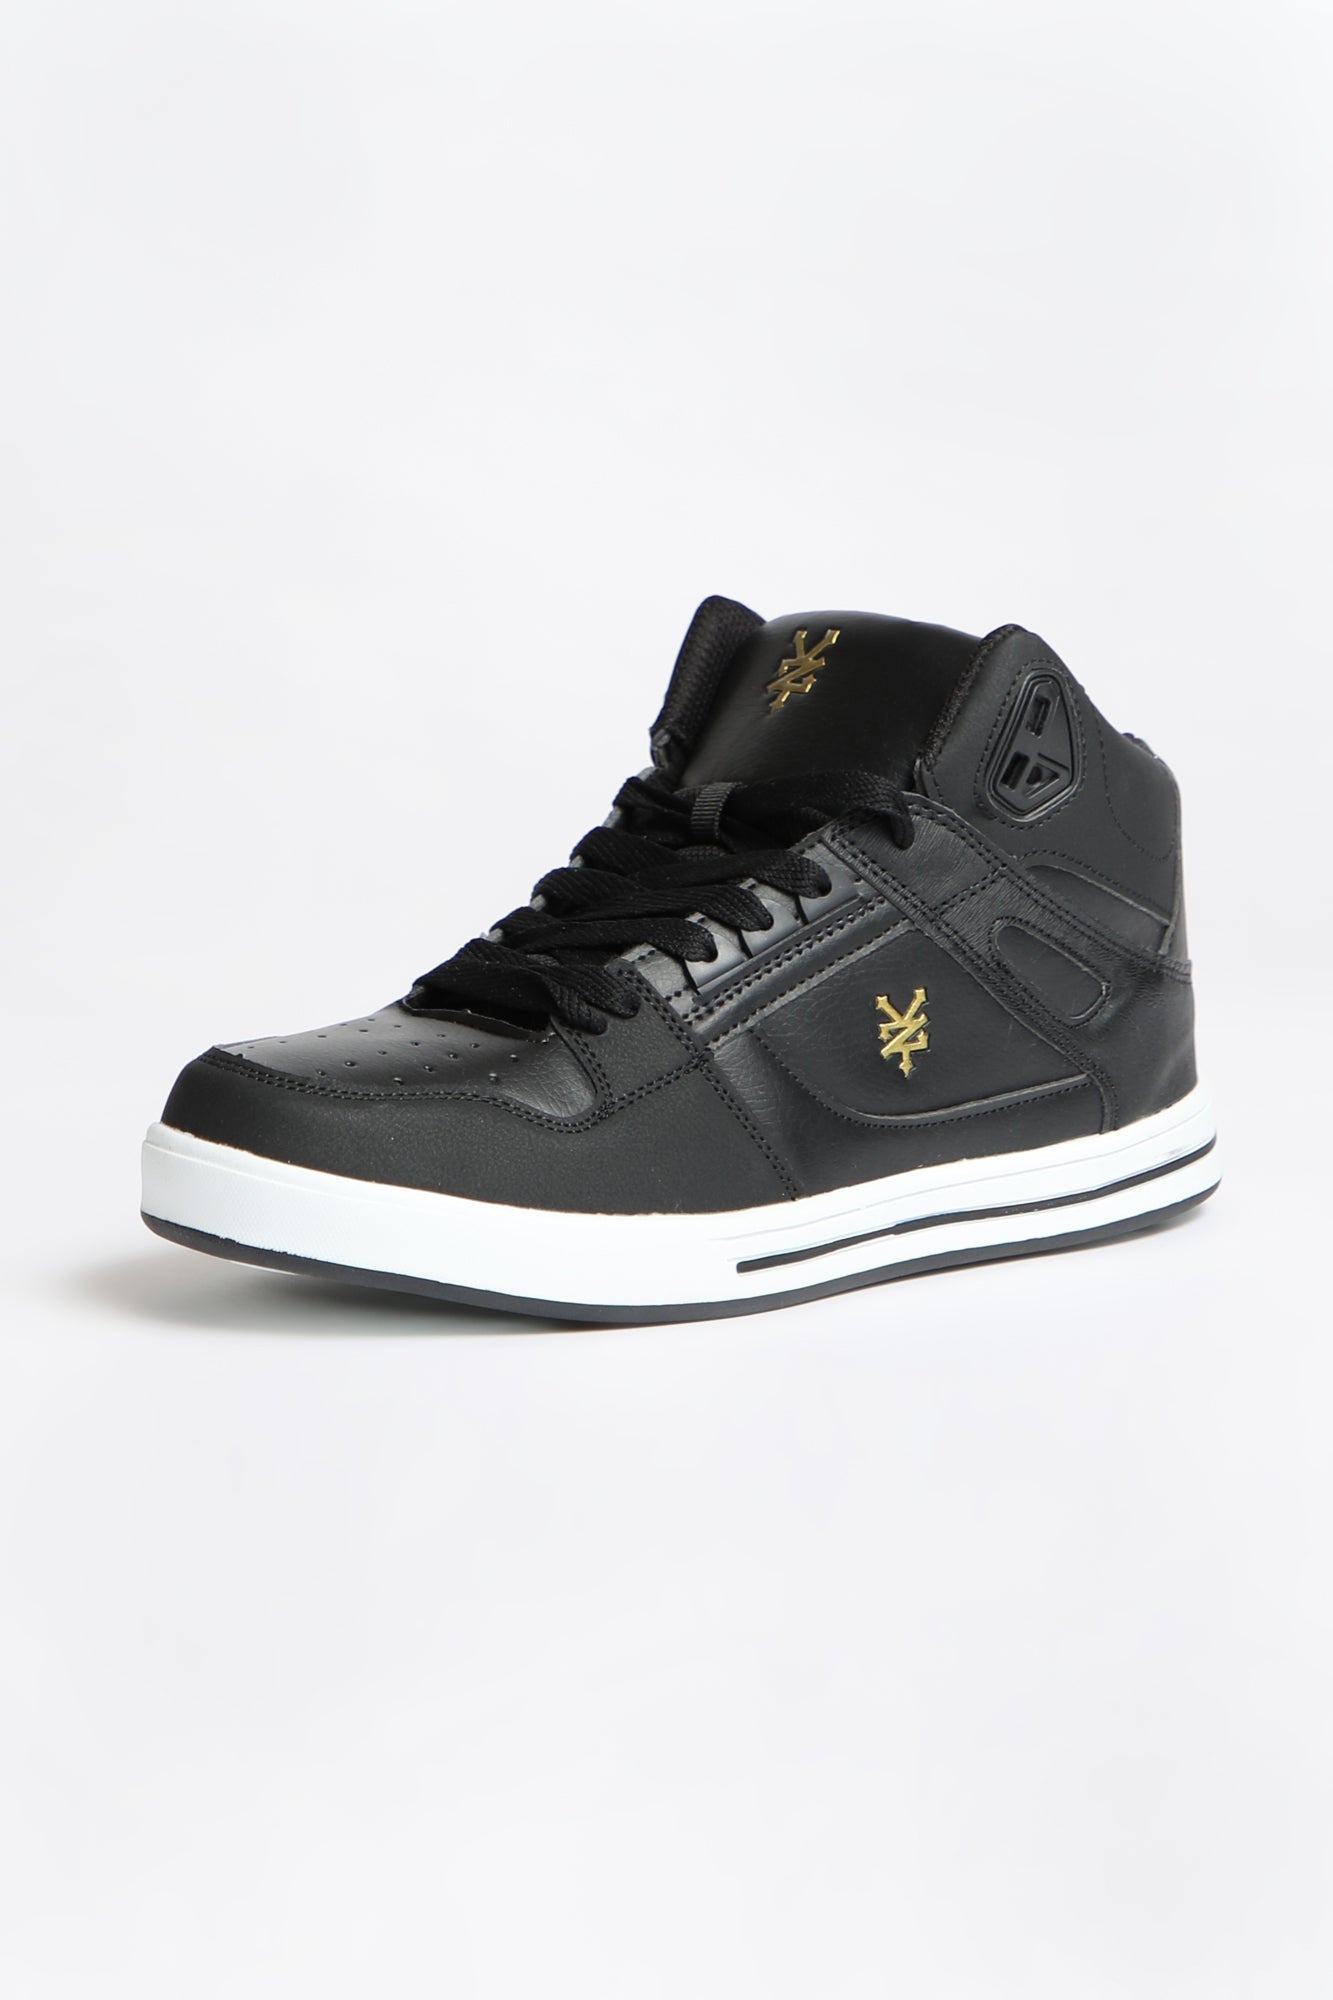 Zoo York Mens High Tops - Black with White /